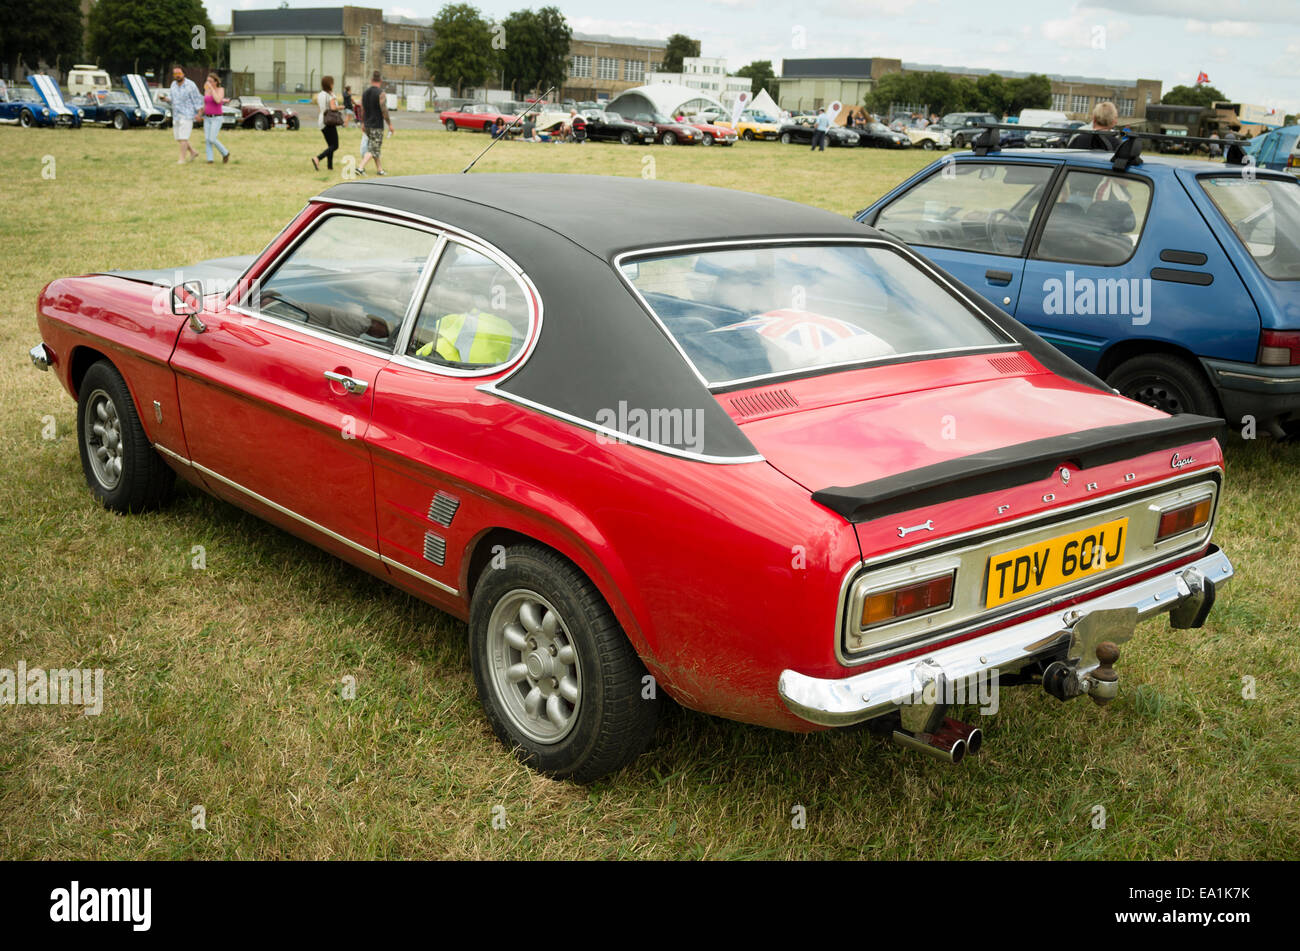 A 1960s rd Ford Capri automobile at an English show Stock Photo